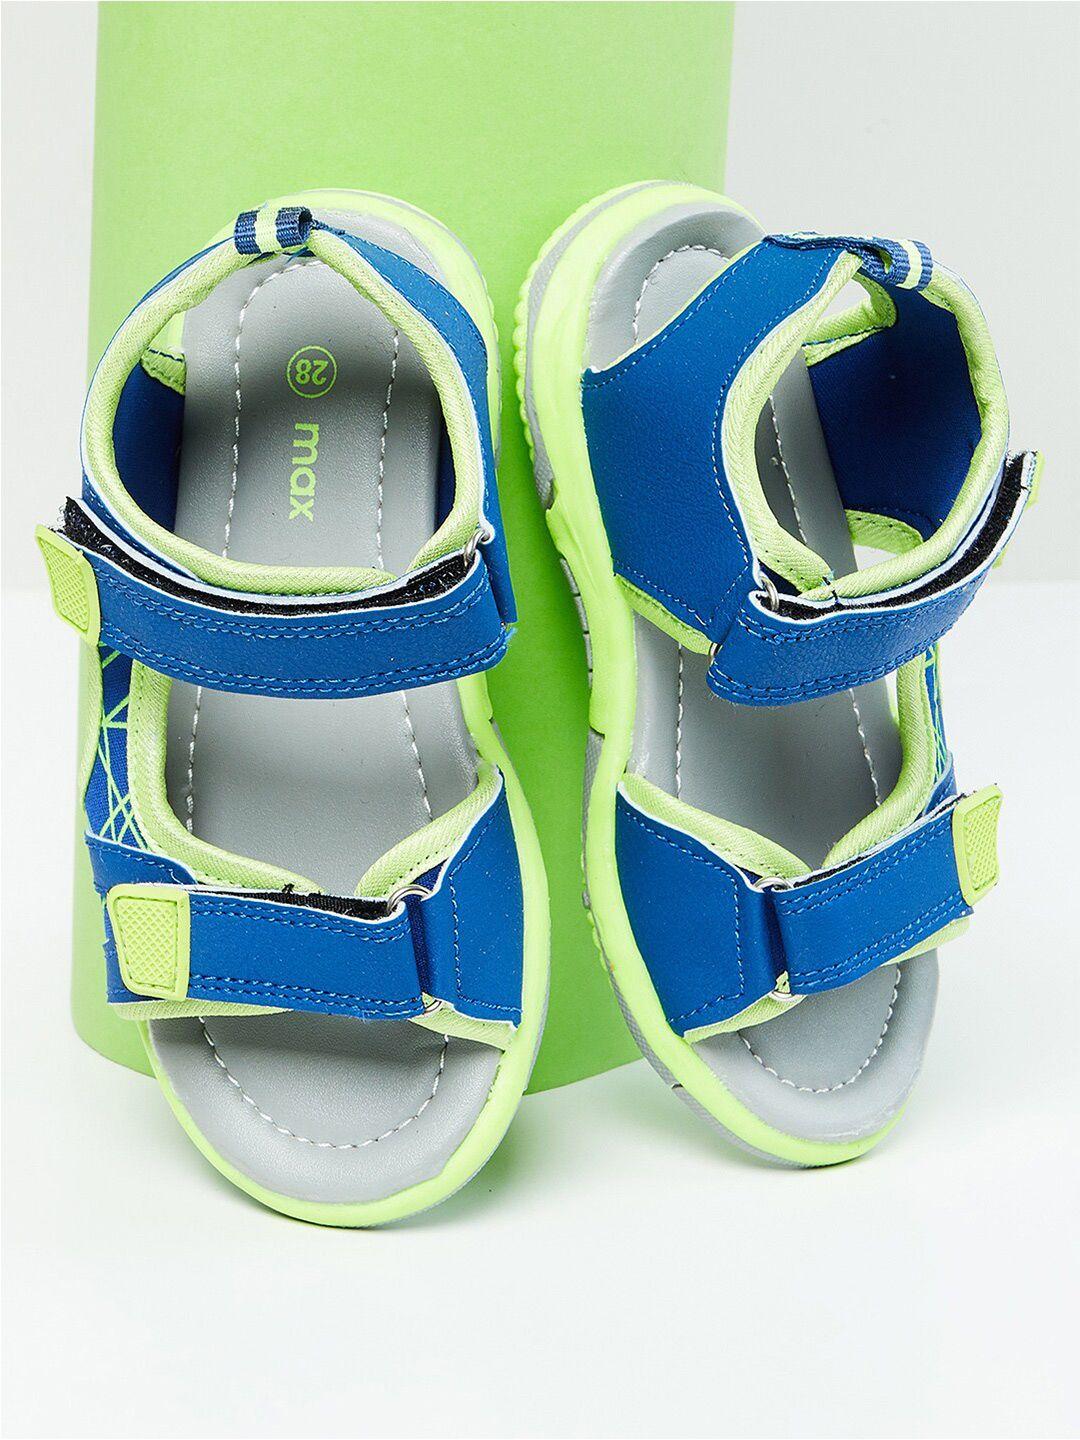 max-boys-blue-&-lime-green-sports-sandals